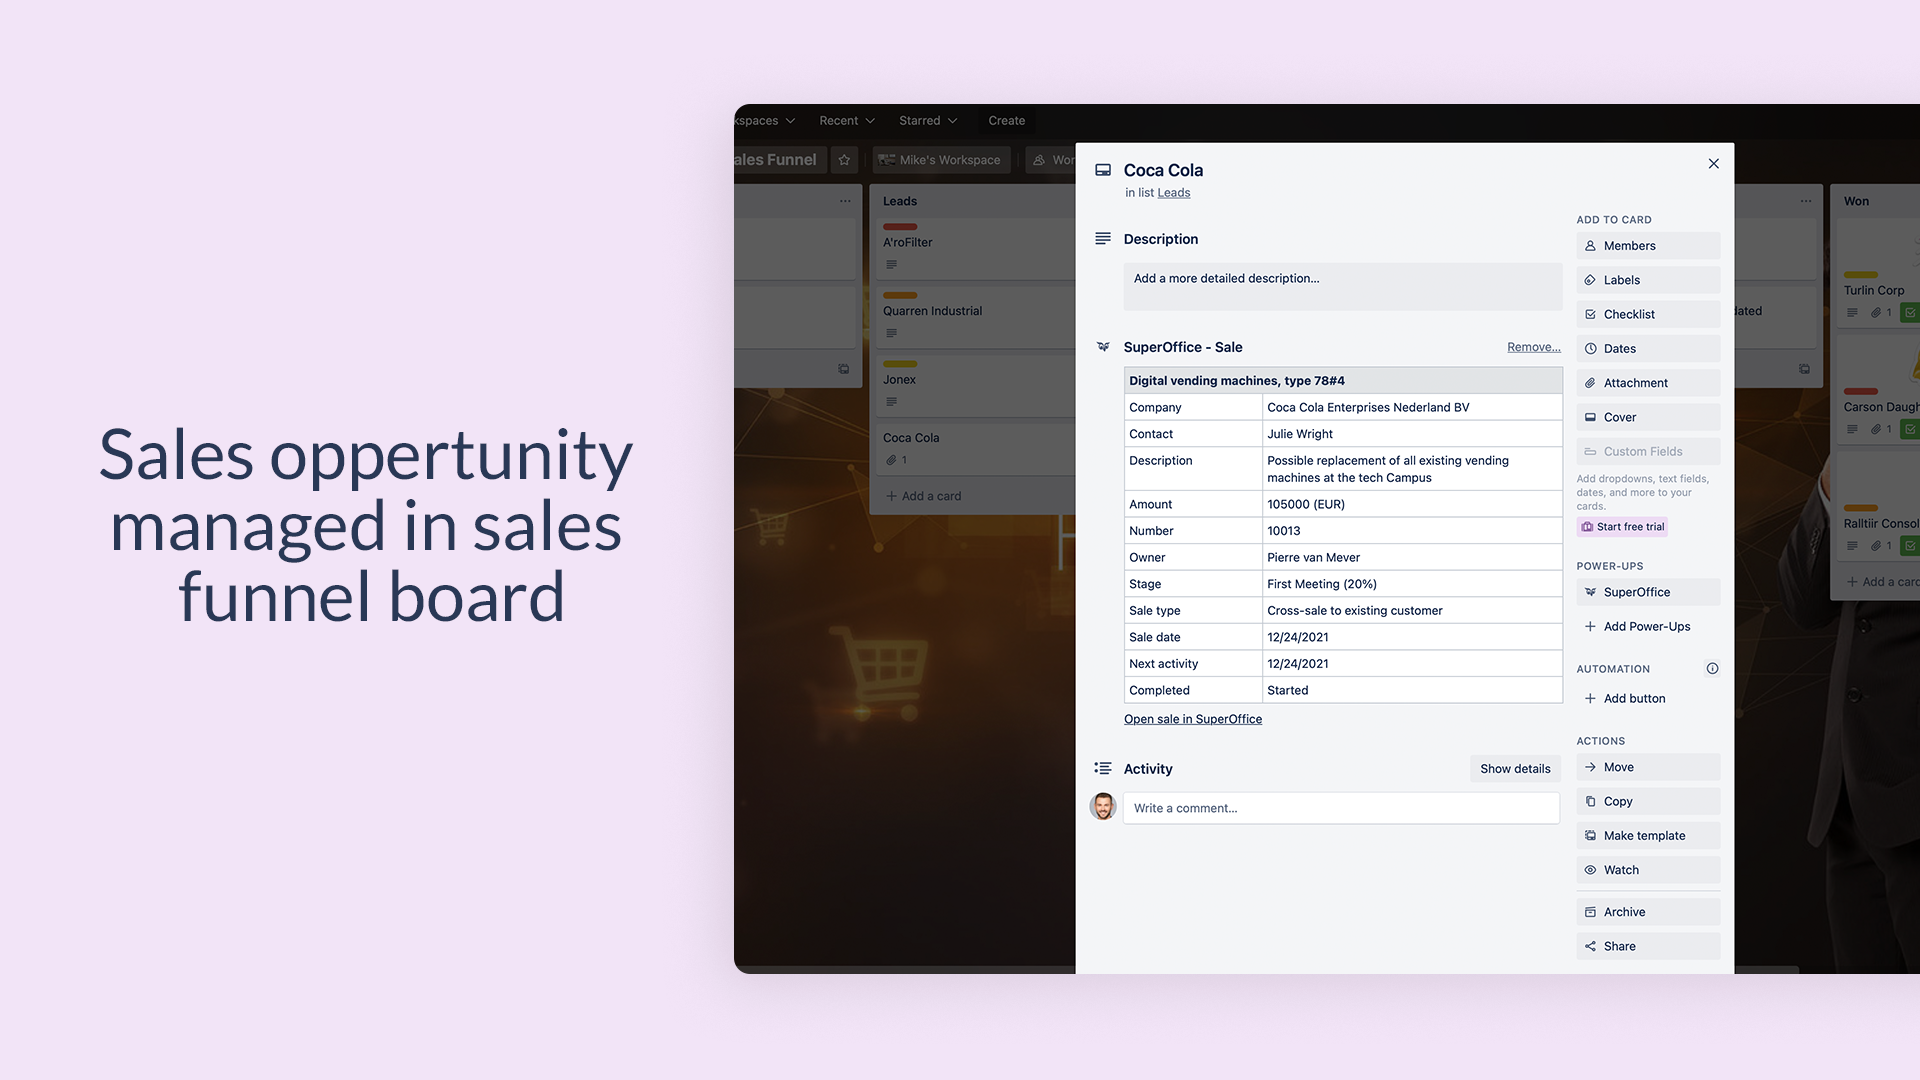 Sales oppertunity managed in sales funnel board